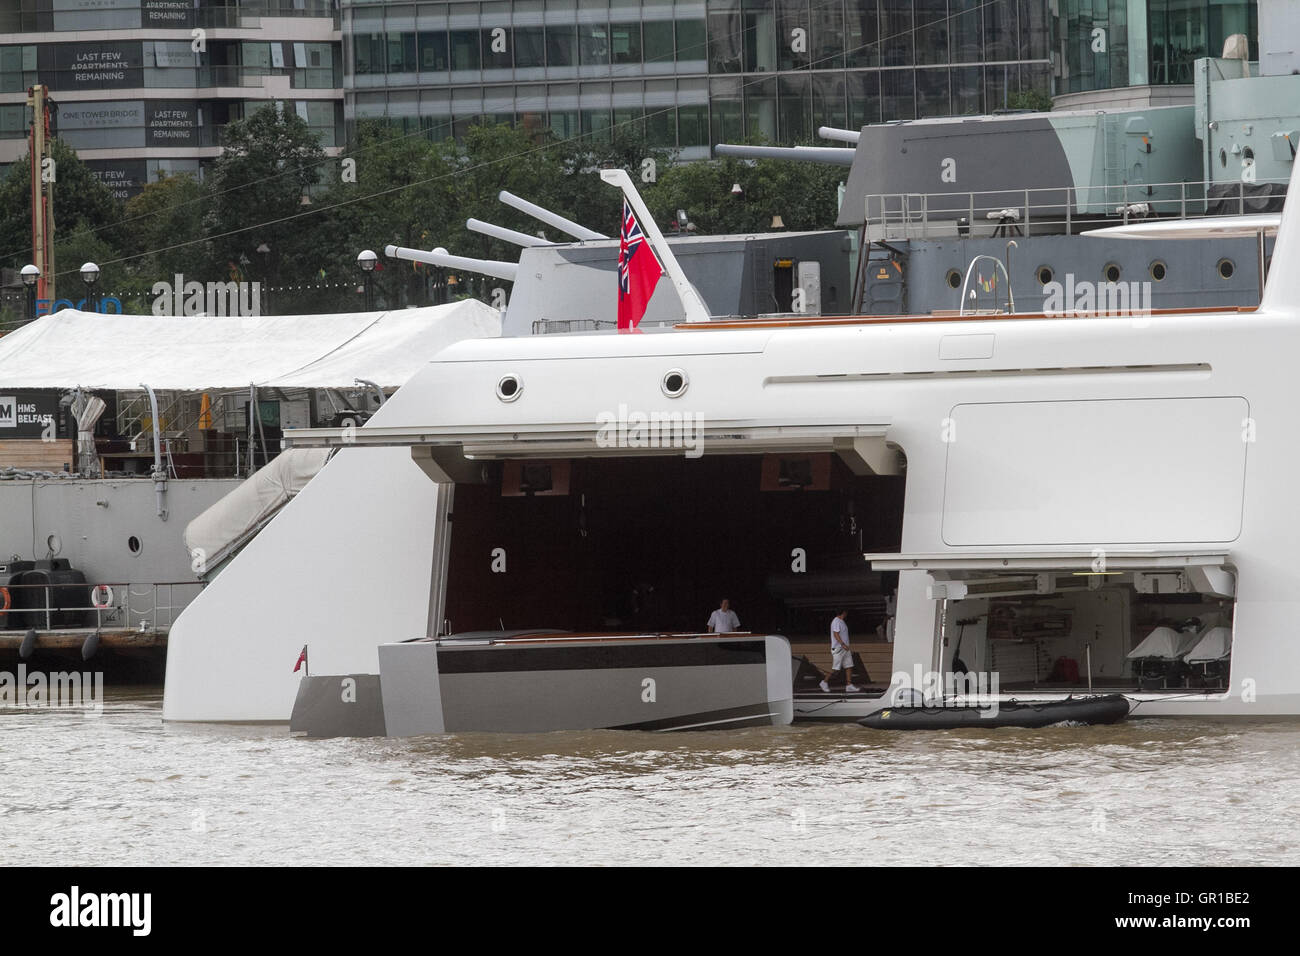 London UK. 6th September 2016. The hatch of A 300 million dollar superyacht by  Russian billionaire Andrey Melnichenko sailed up the River Thames  to moor alongside HMS Belfast. The 119 metre superyacht was designed by Phillip Starck and built at the Blohm and Voos Shipyards in 2008 Credit:  amer ghazzal/Alamy Live News Stock Photo